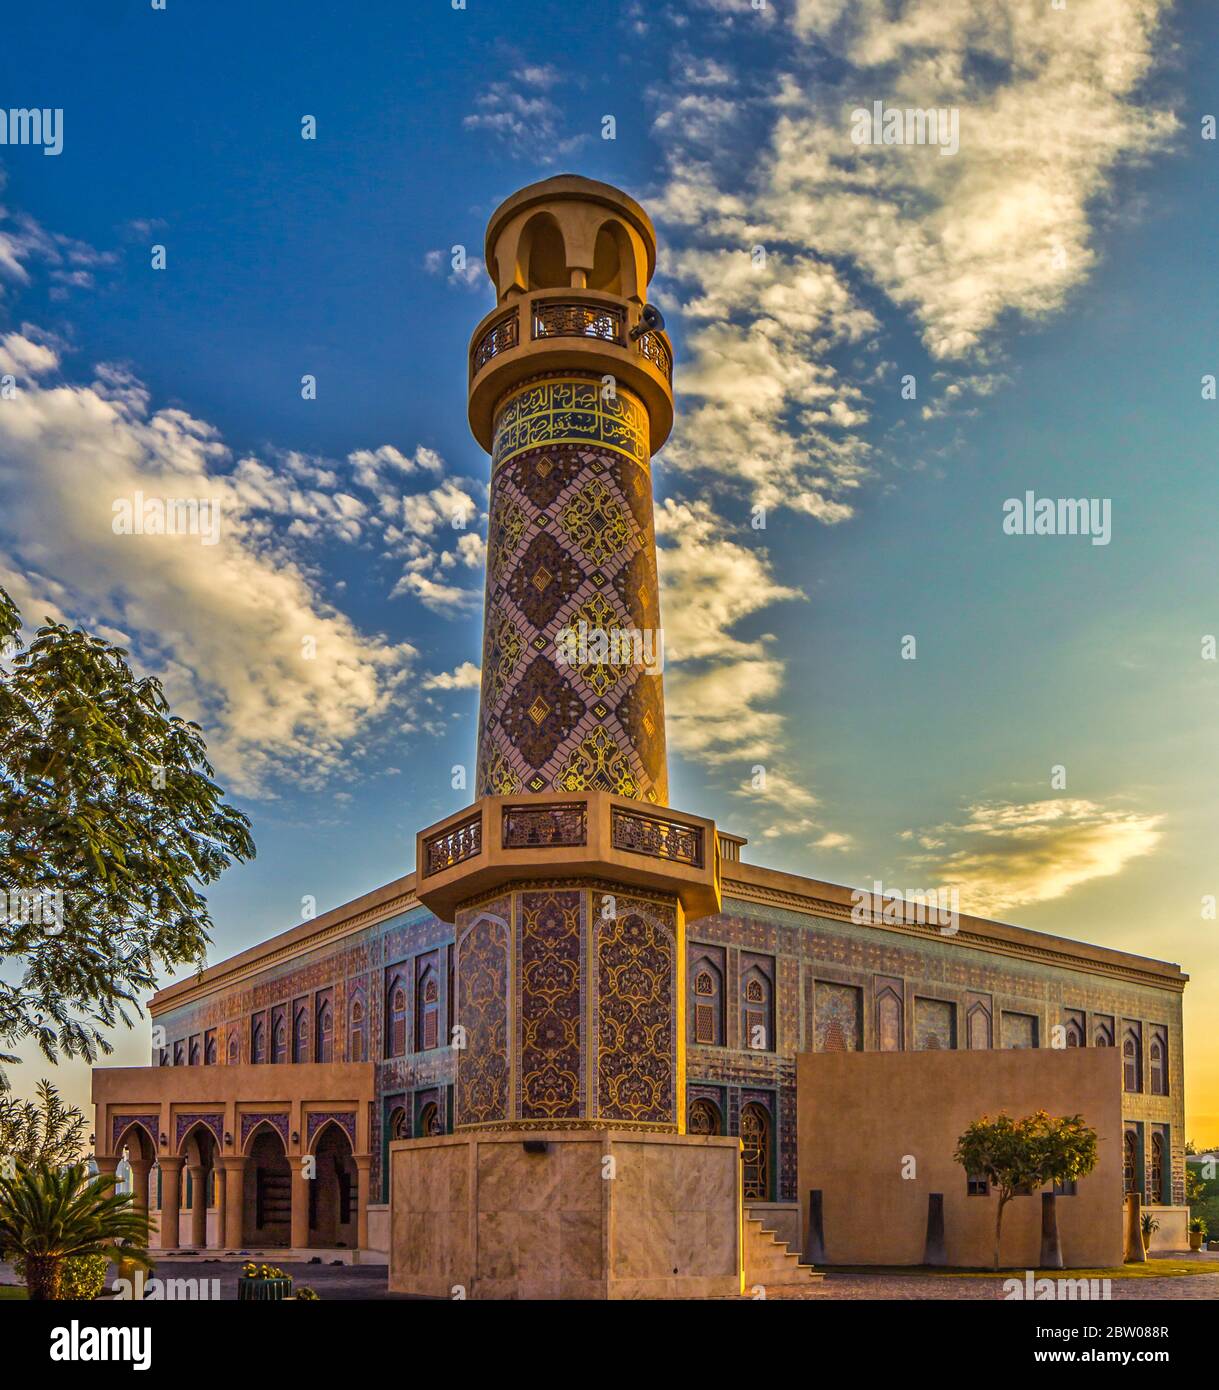 Katara Mosque, Doha, Qatar in daylight exterior view with clouds in sky. Stock Photo